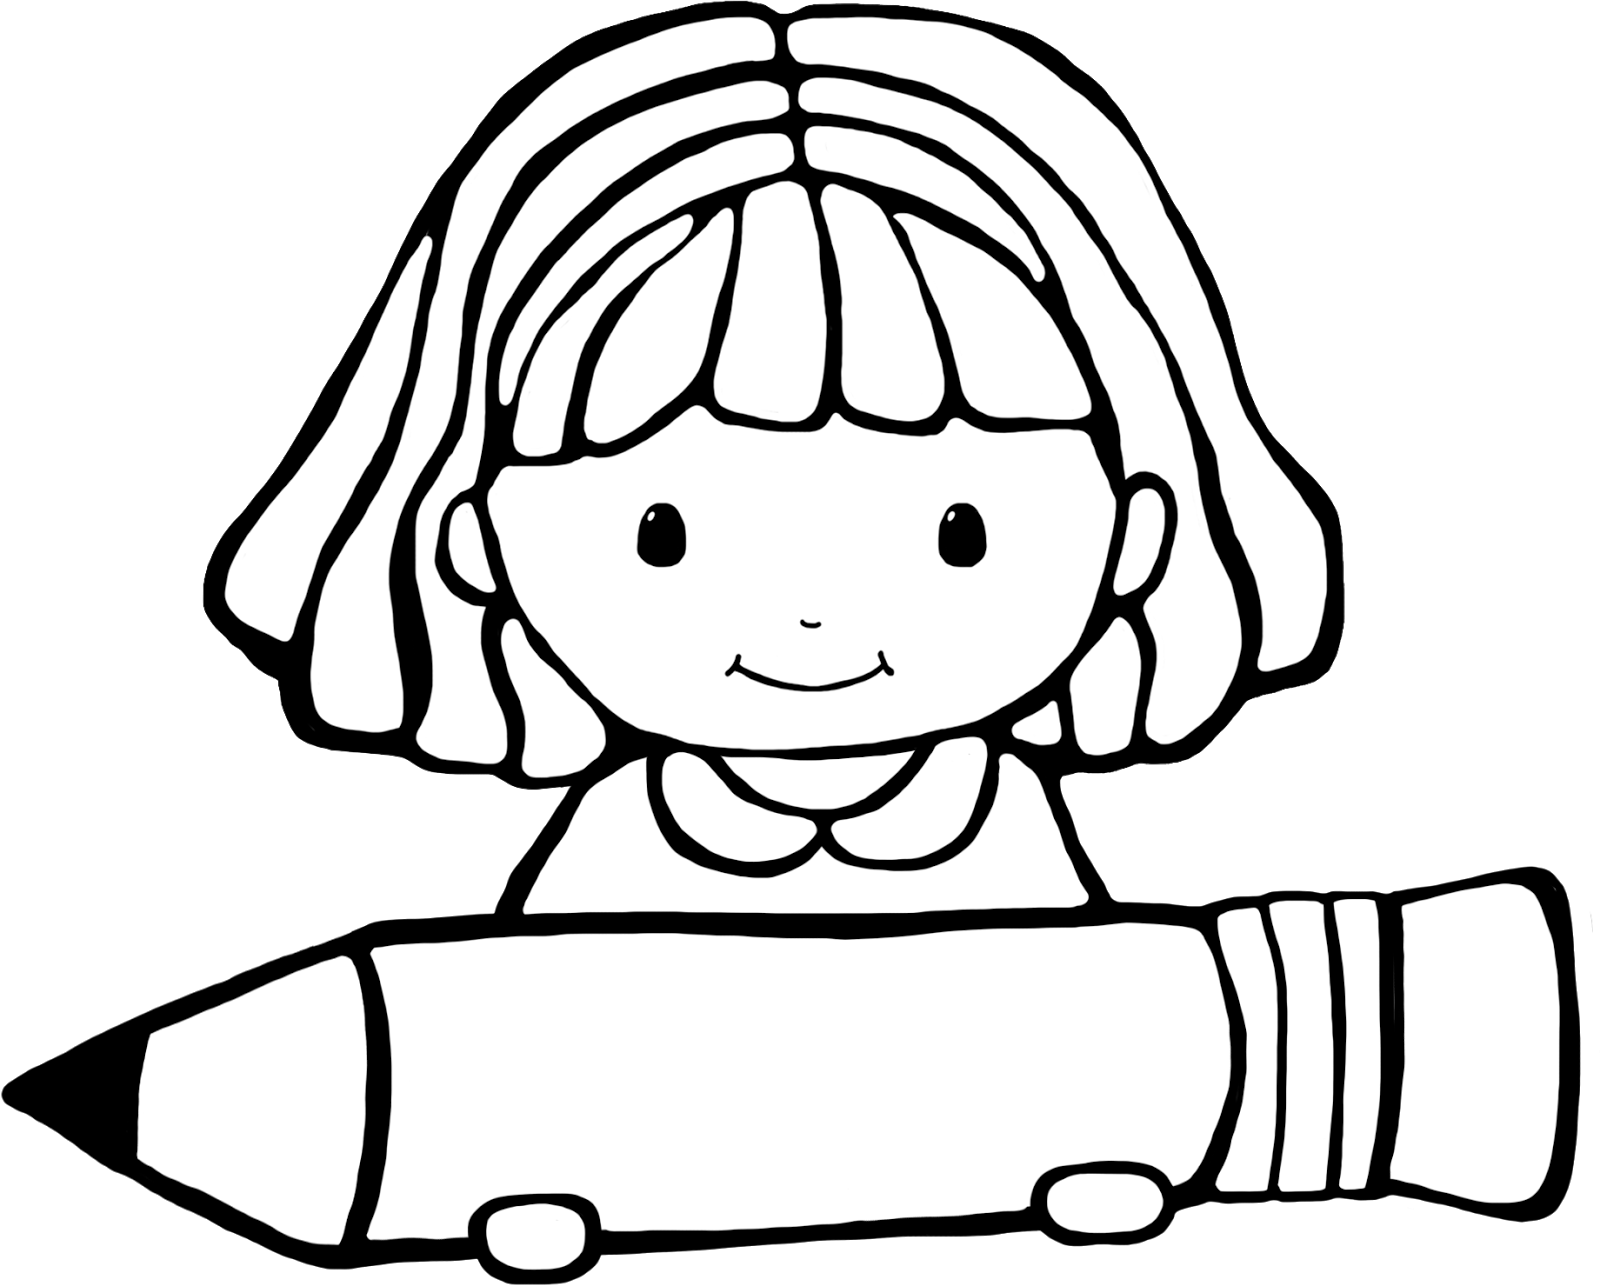 Toddler clipart black and white. Student drawing at getdrawings